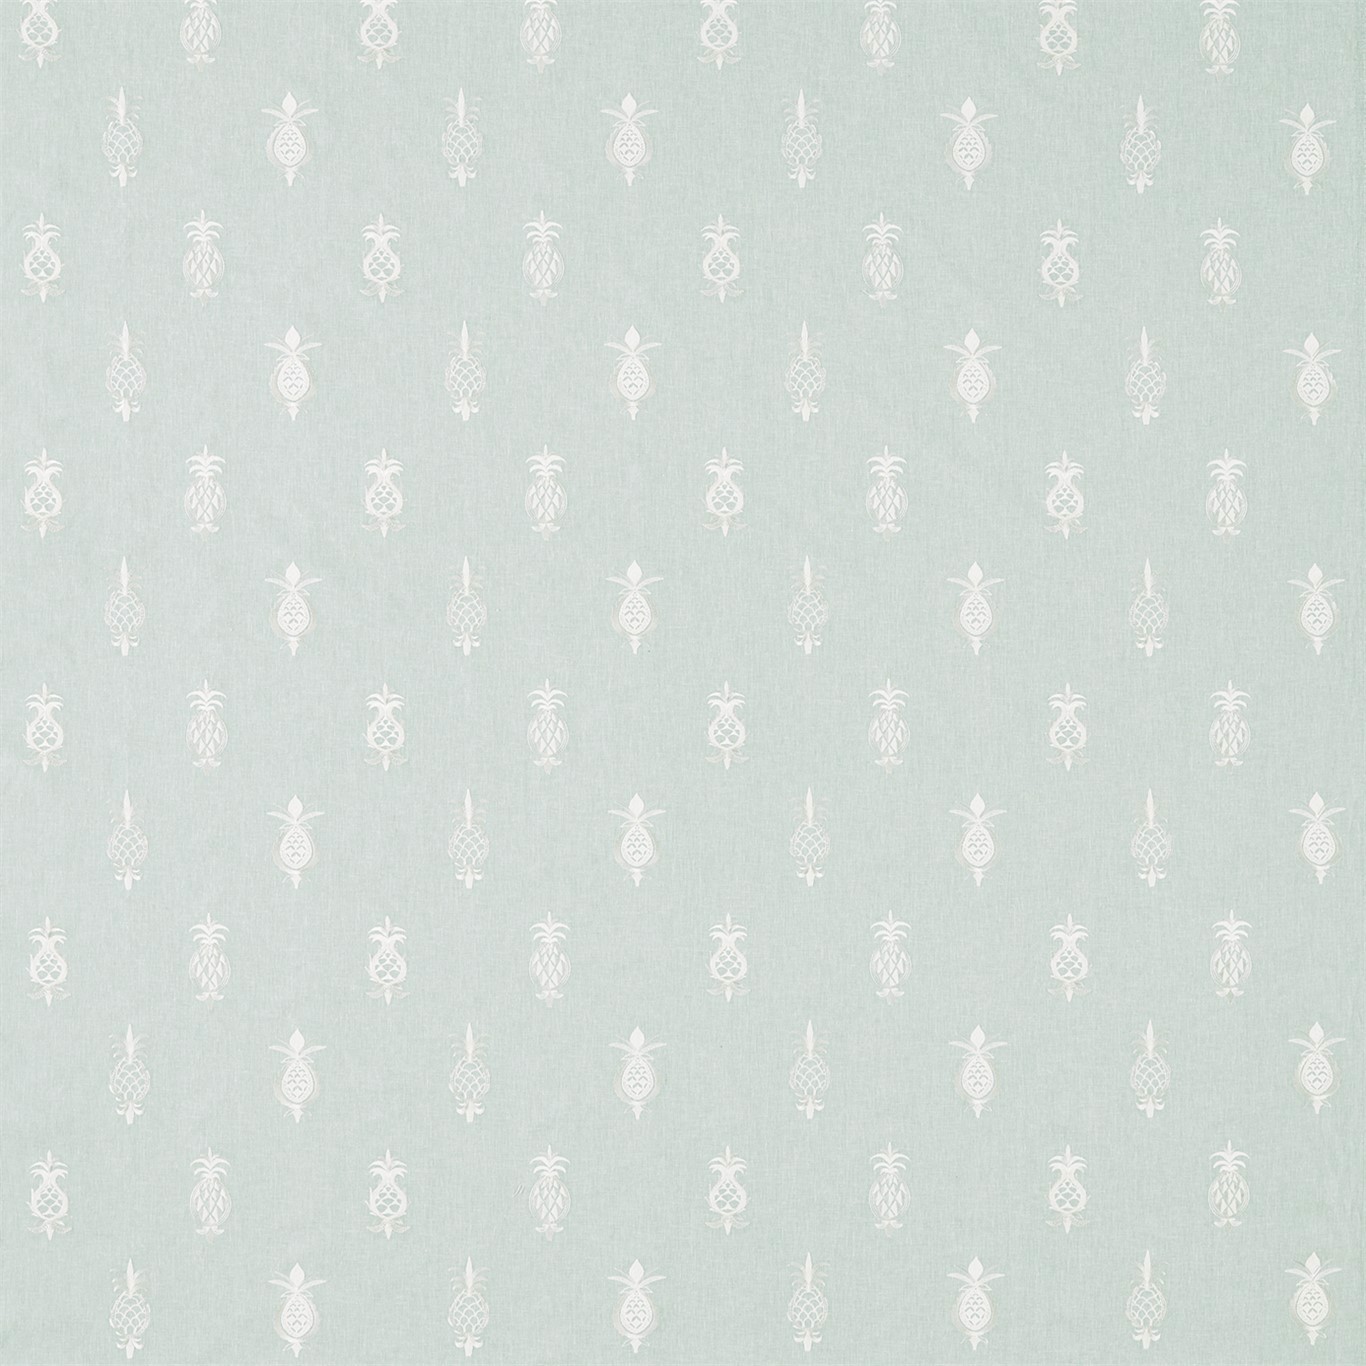 Pinery Teal Fabric by SAN